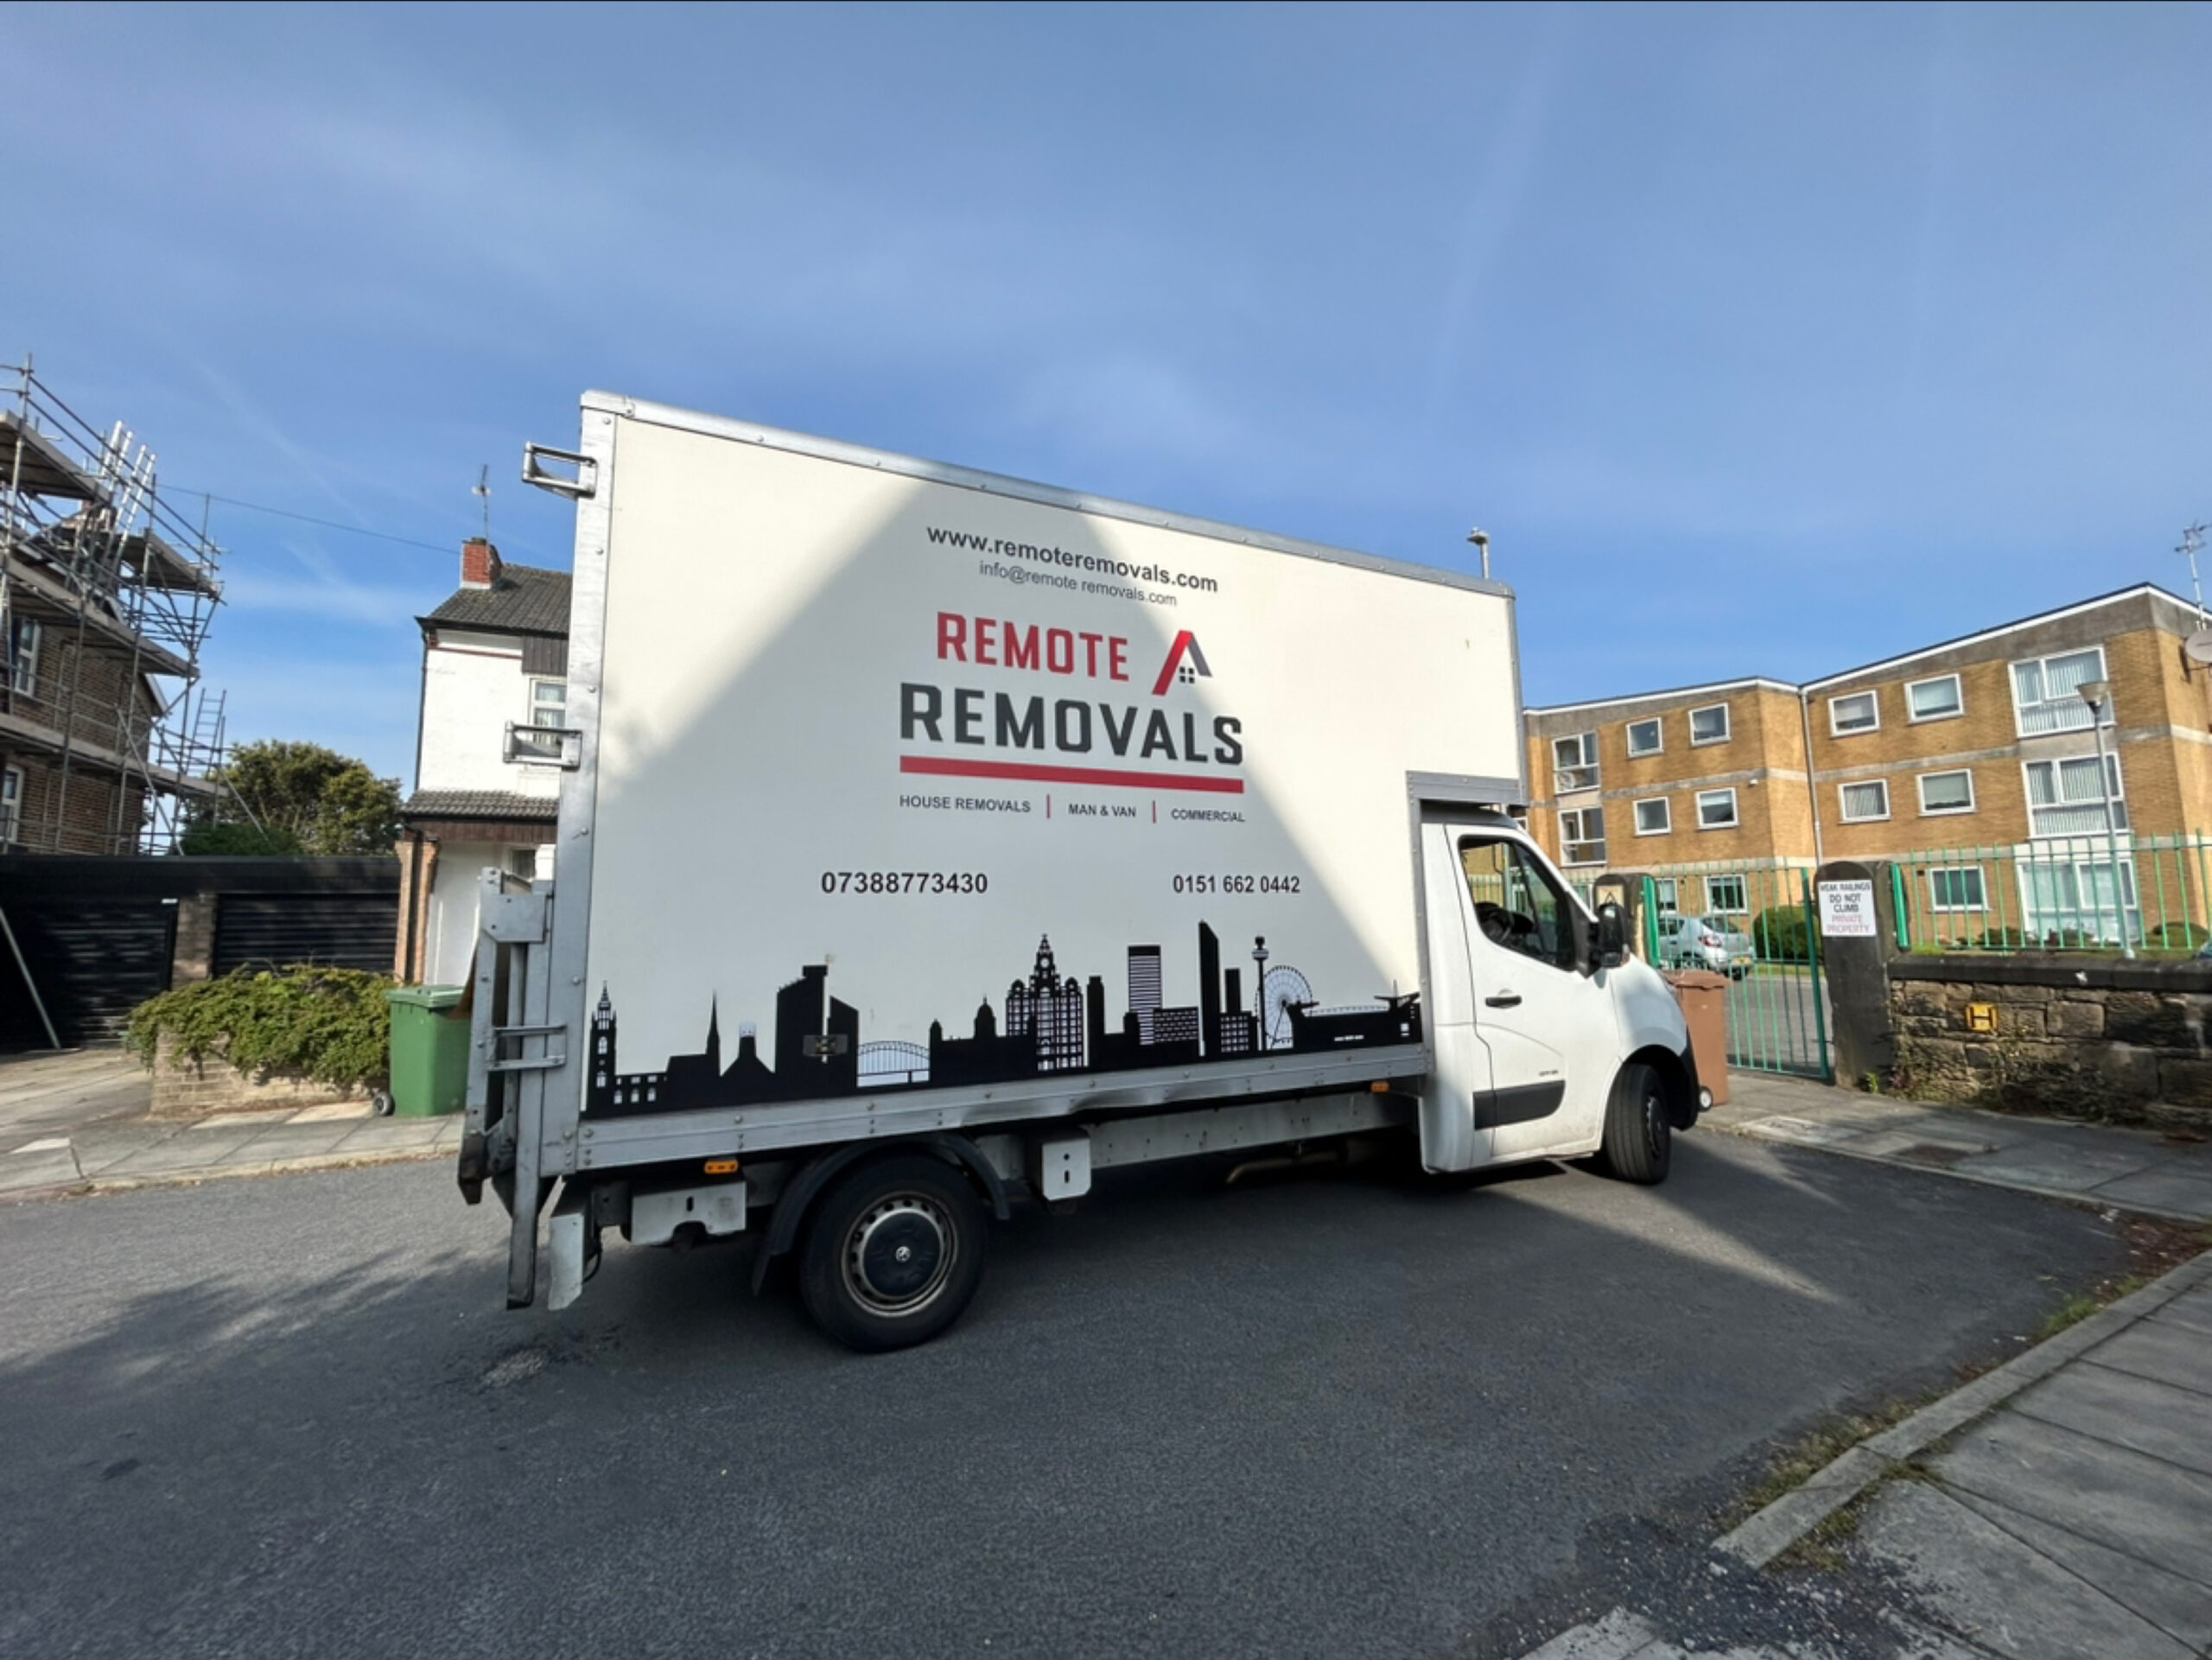 Remote Removals Reviews Wallasey